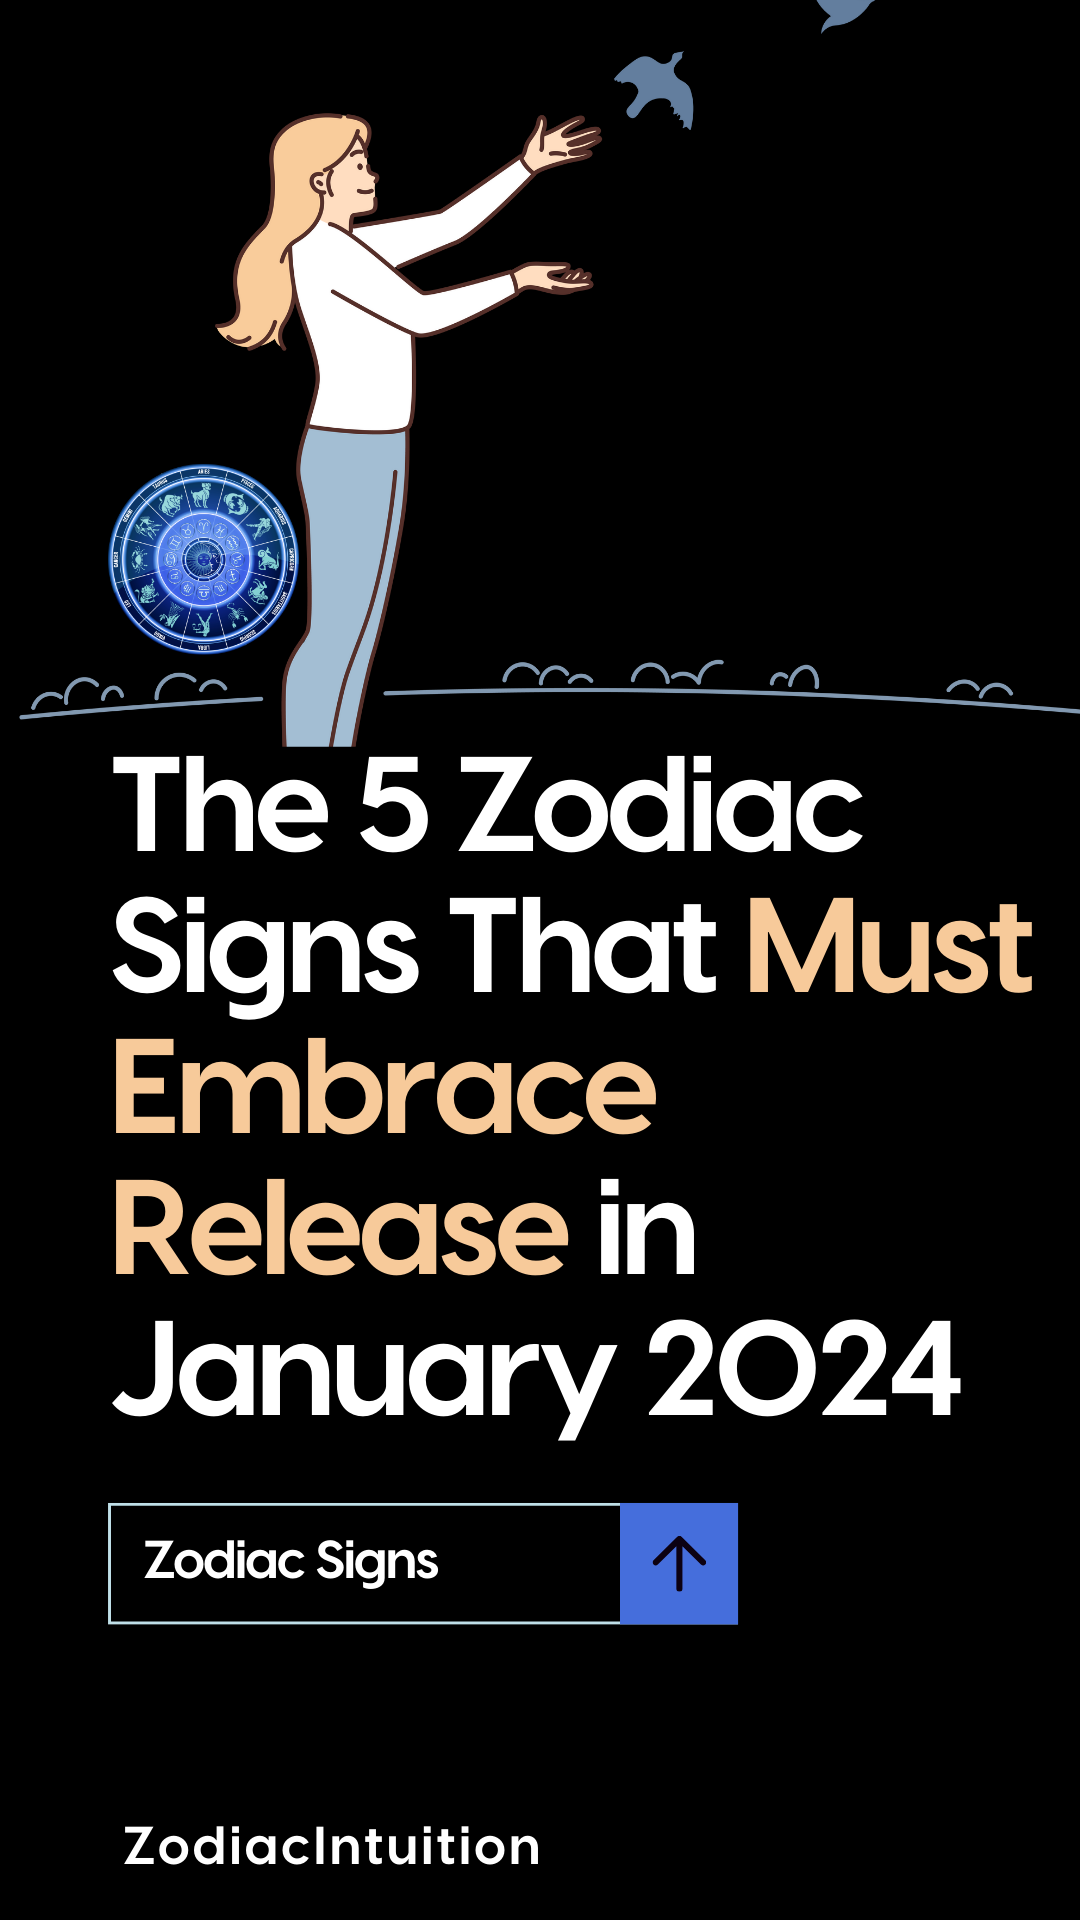 The 5 Zodiac Signs That Must Embrace Release in January 2024